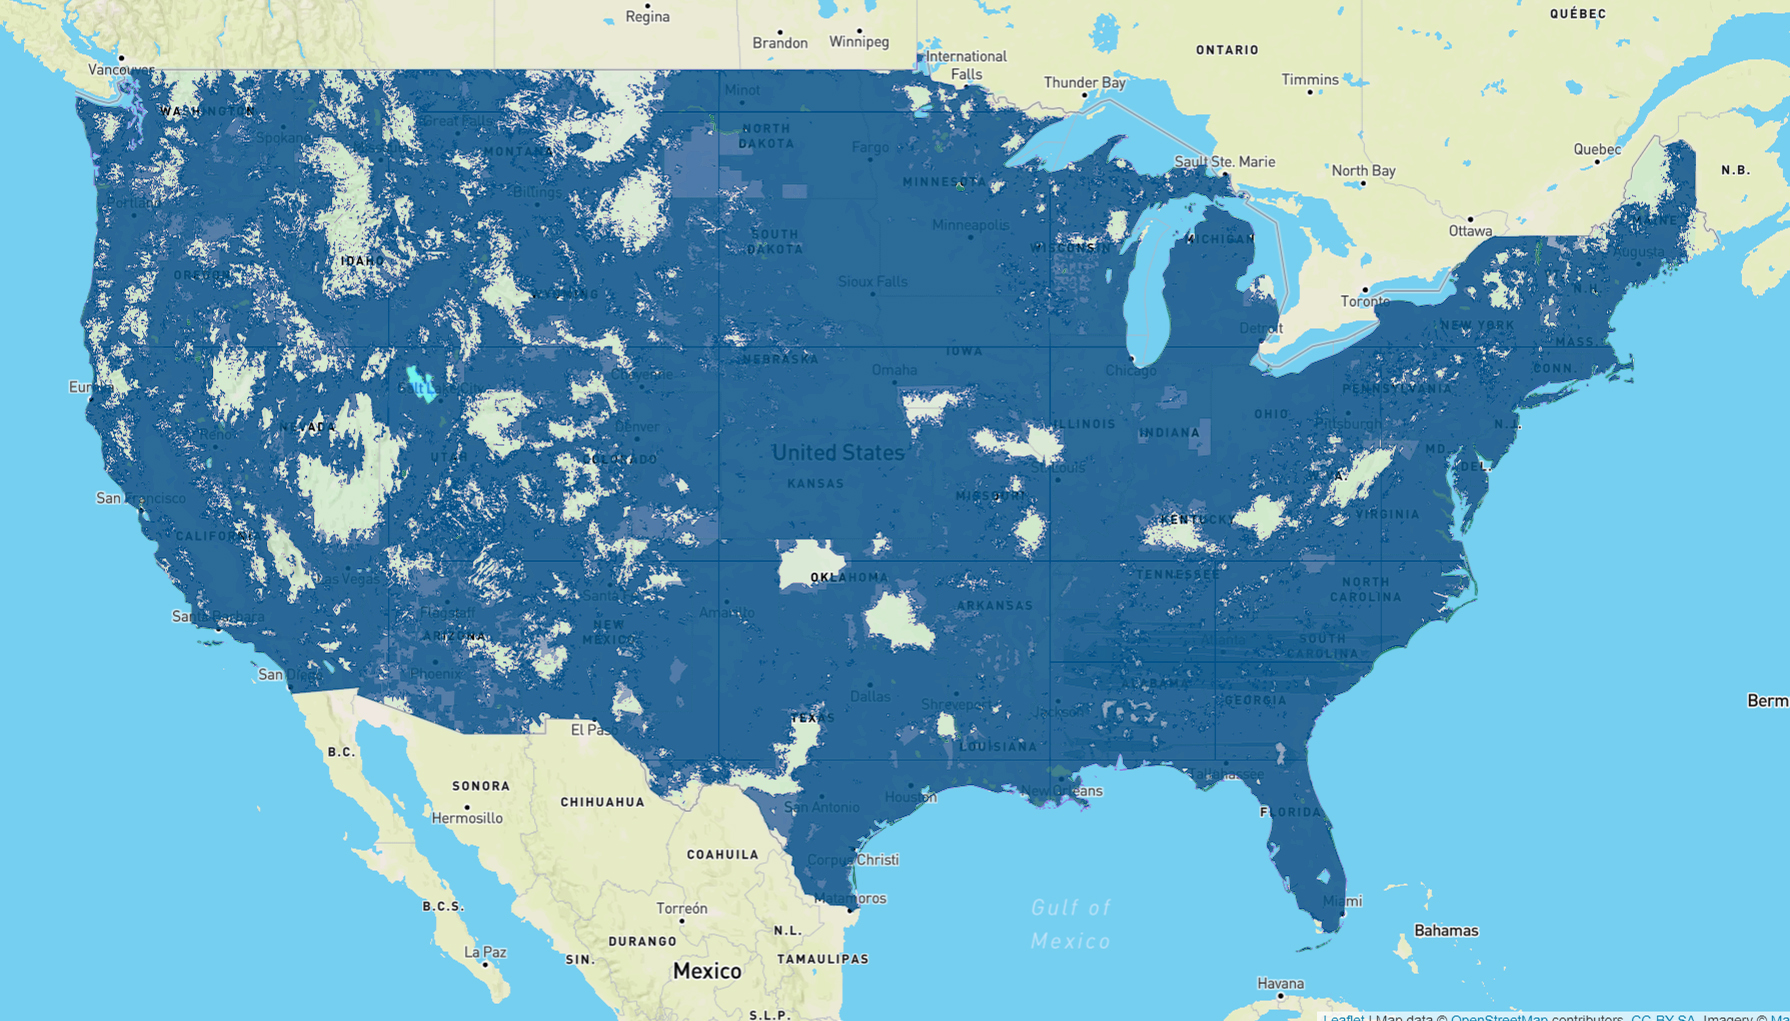 Nationwide Cellular coverage map